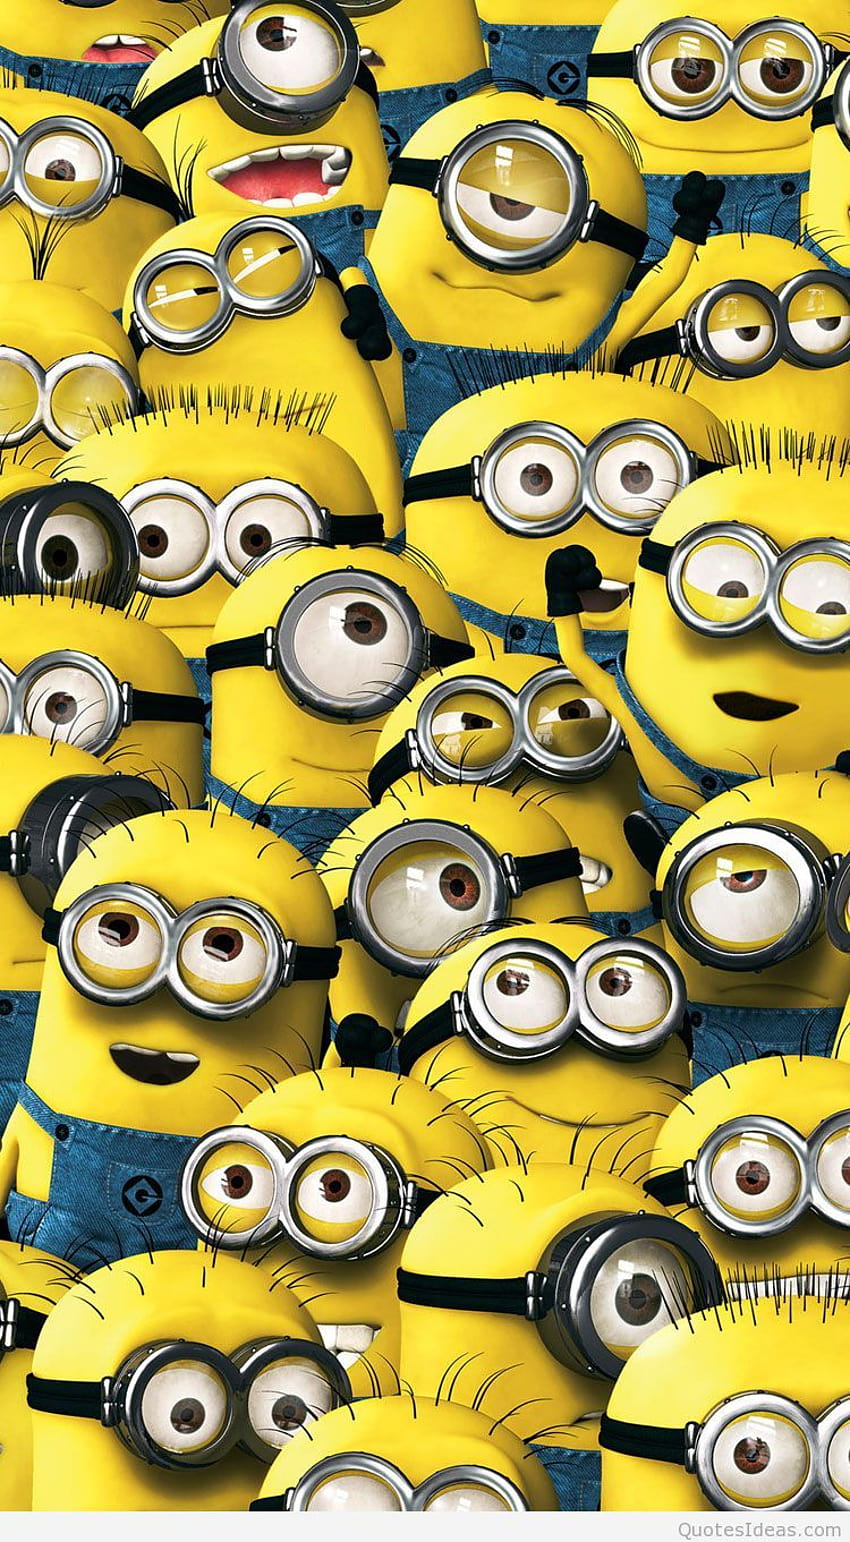 Download Running Despicable Me Minion Iphone Wallpaper  Wallpaperscom